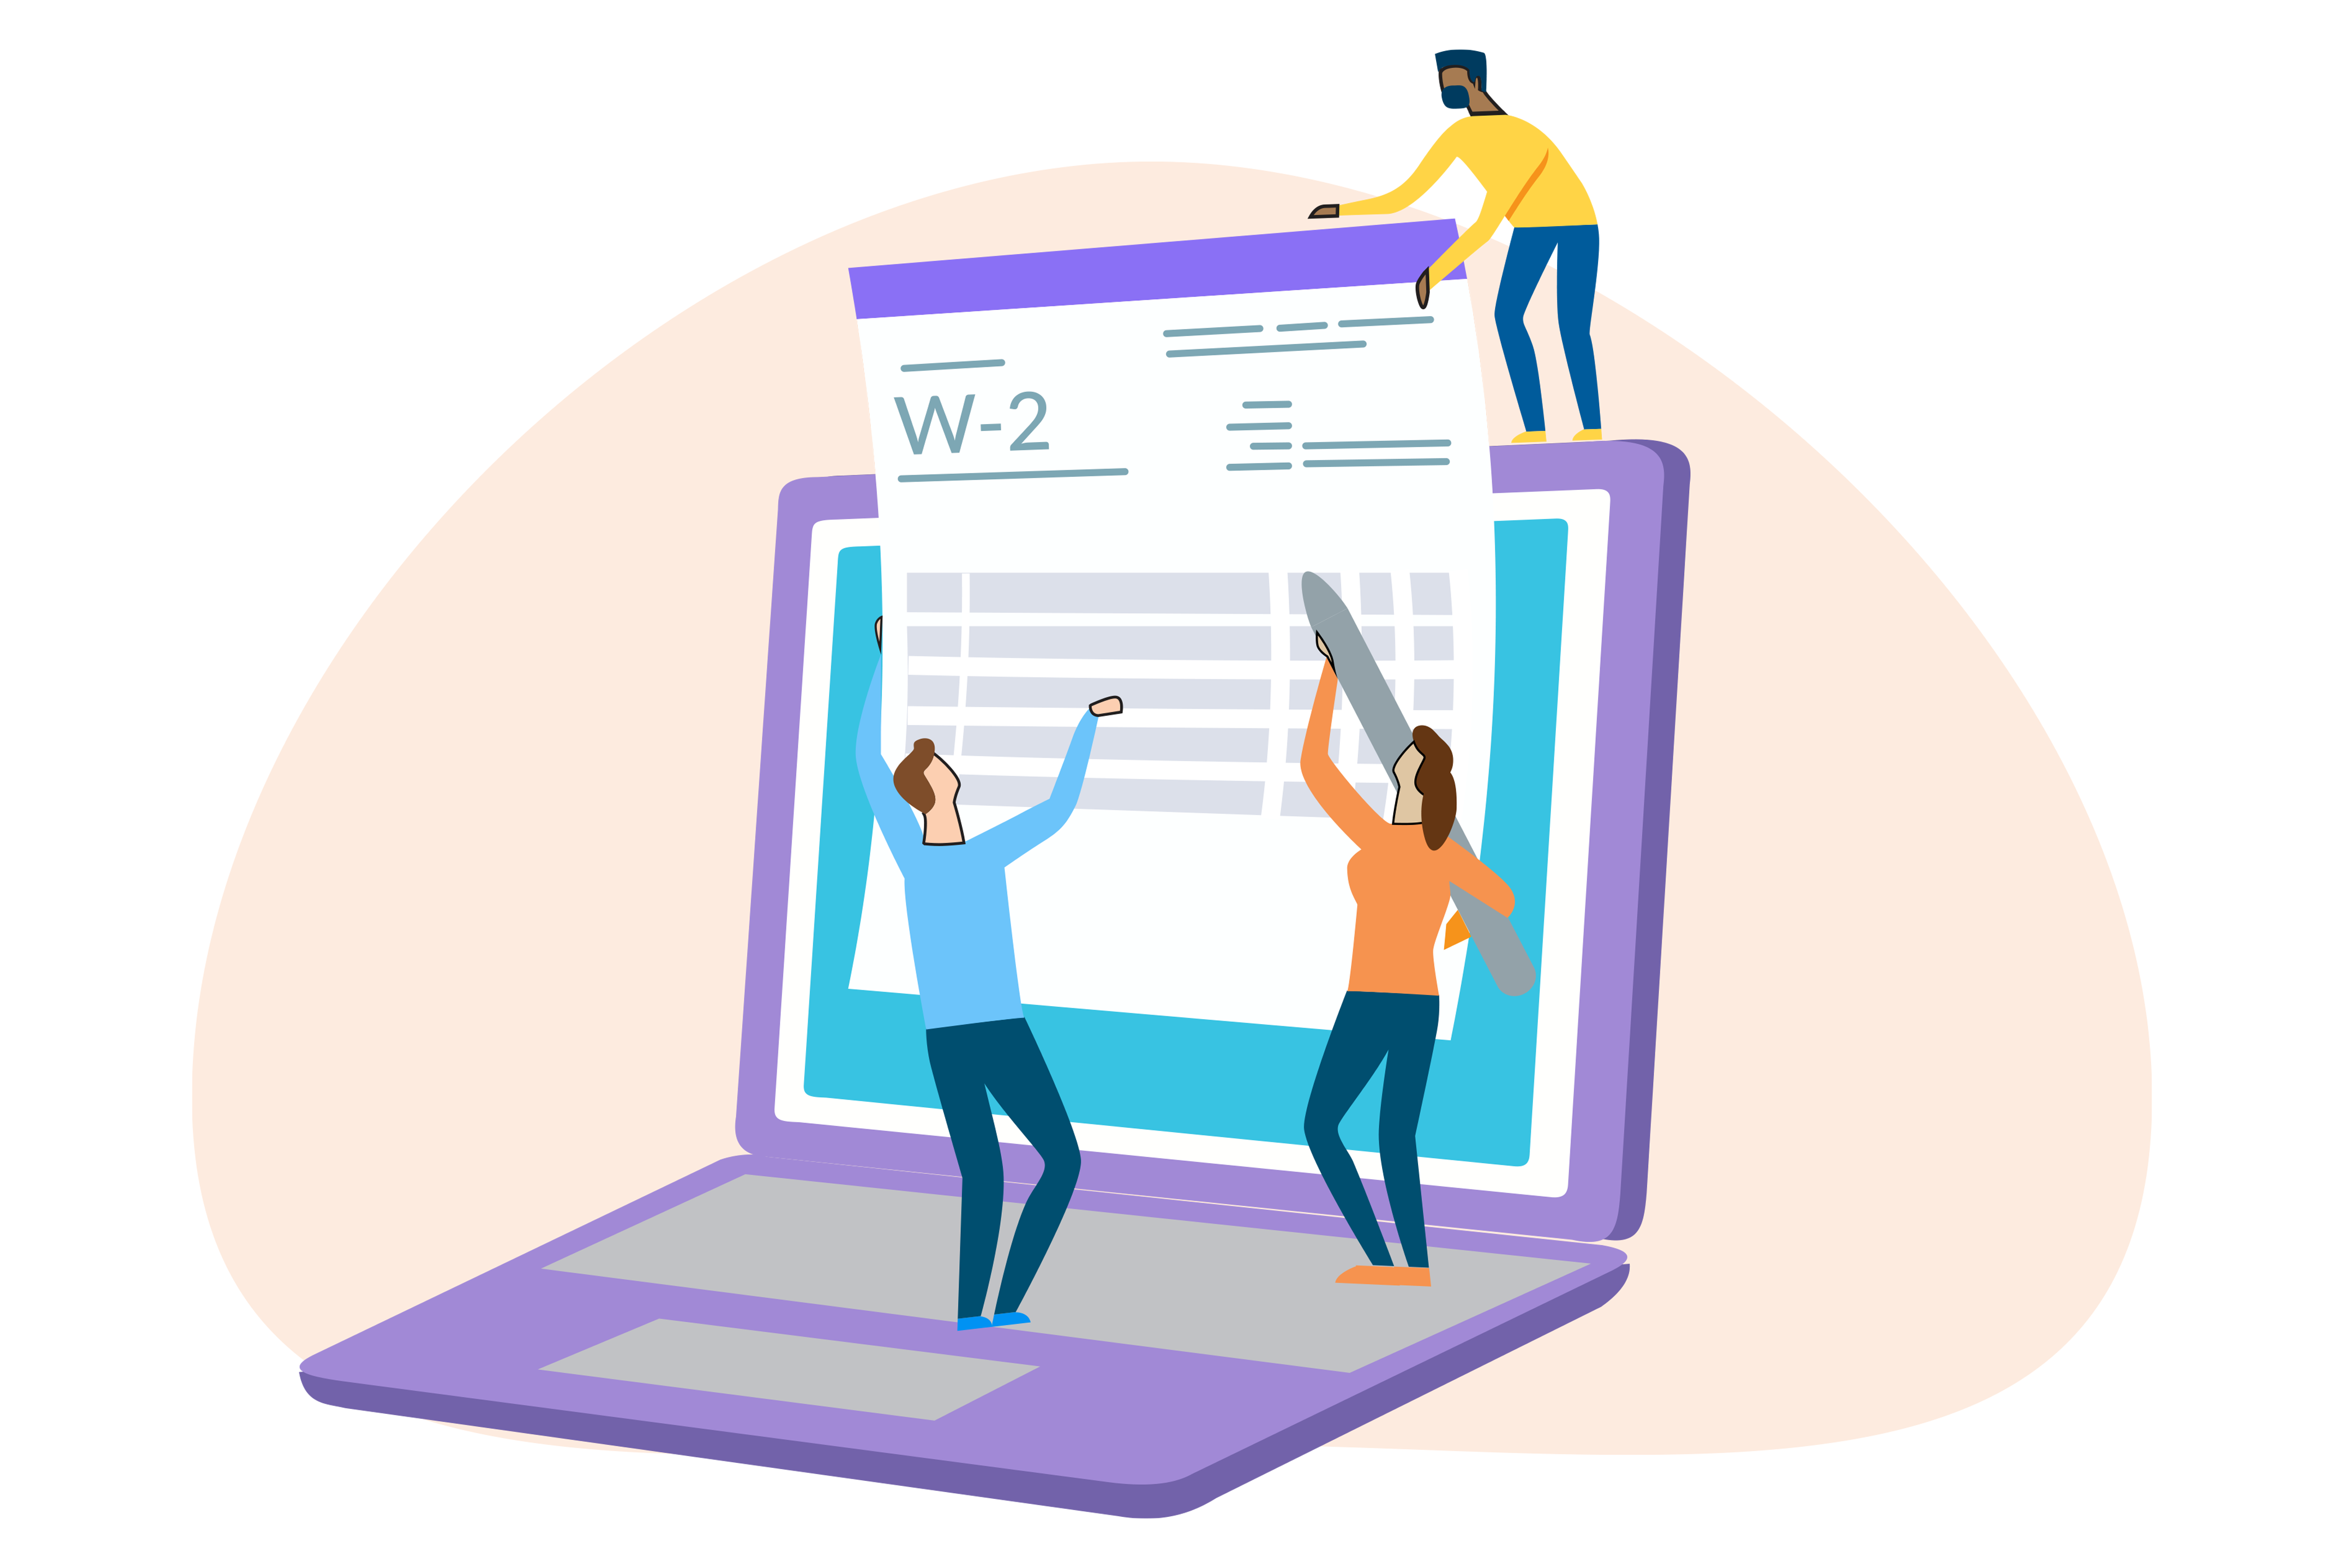 How To Get Copies Of Your Old W-2 Forms | Joblist for Where To Find Old W2 Forms